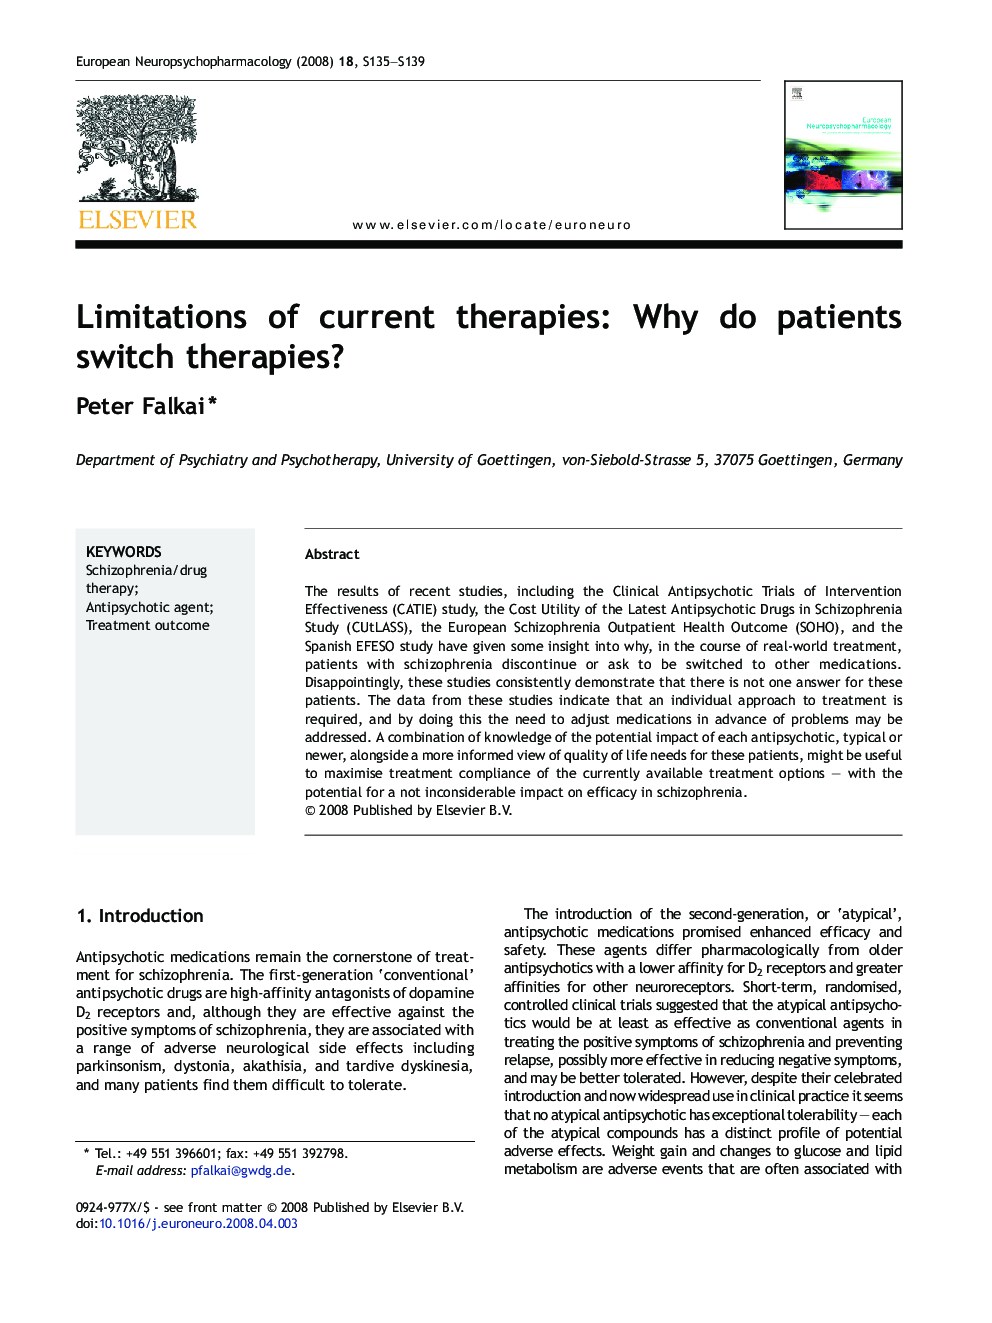 Limitations of current therapies: Why do patients switch therapies?